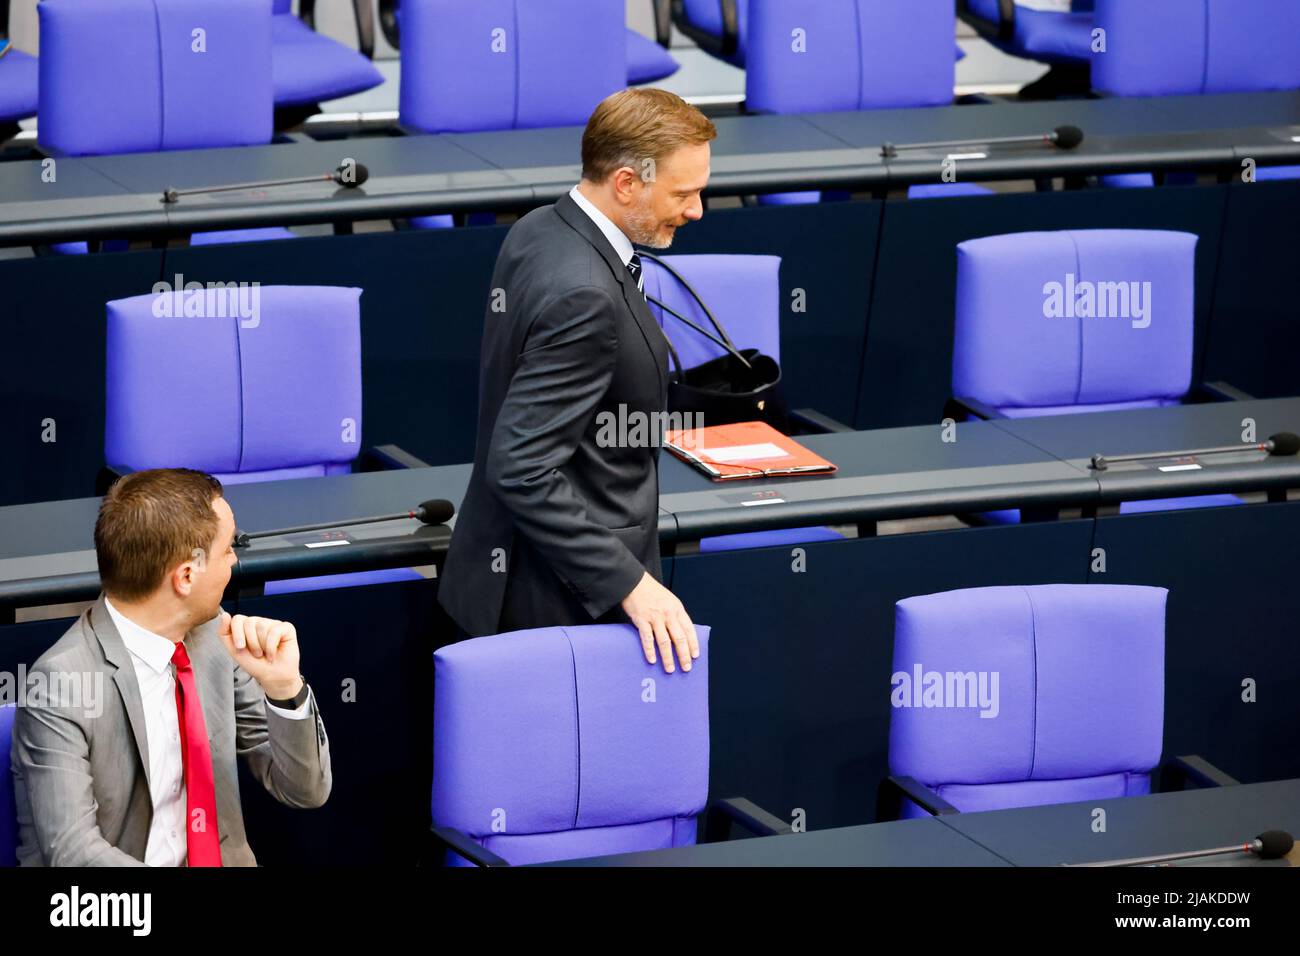 German Finance Minister Christian Lindner attends a session of German lower house of parliament, Bundestag, in Berlin, Germany May 31, 2022. REUTERS/Hannibal Hanschke Stock Photo